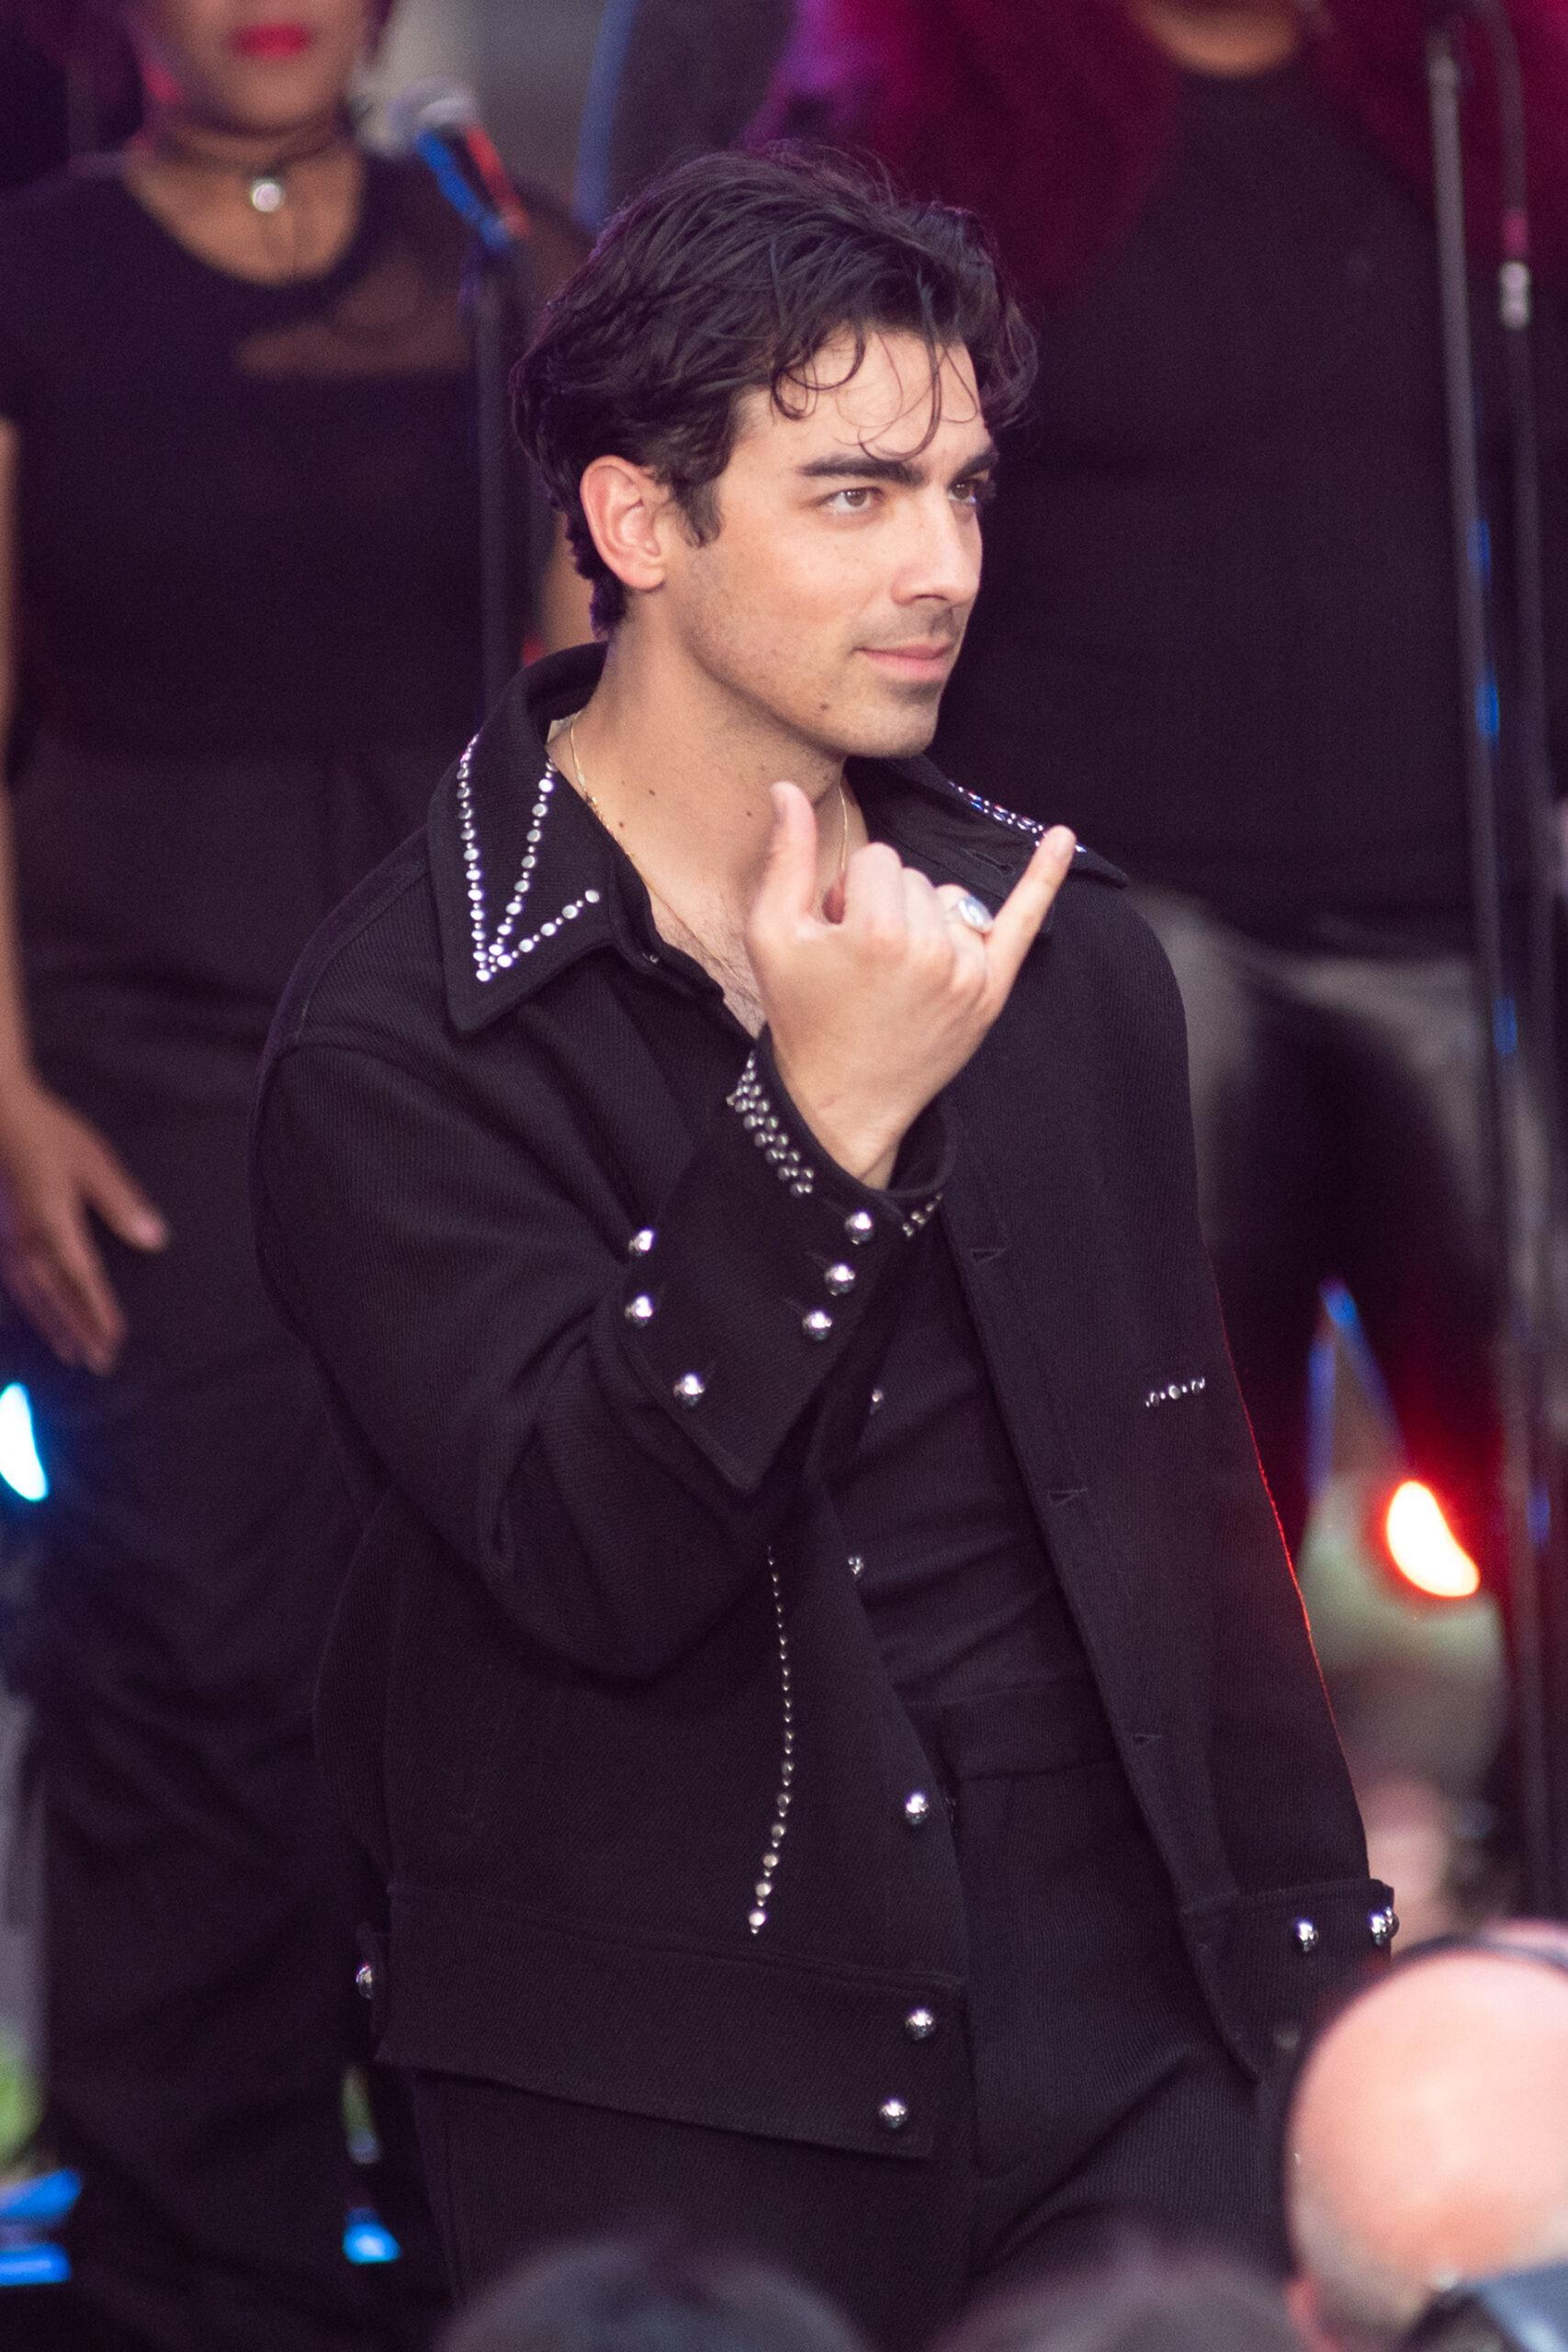 Jonas Brothers at the NBC Today Show